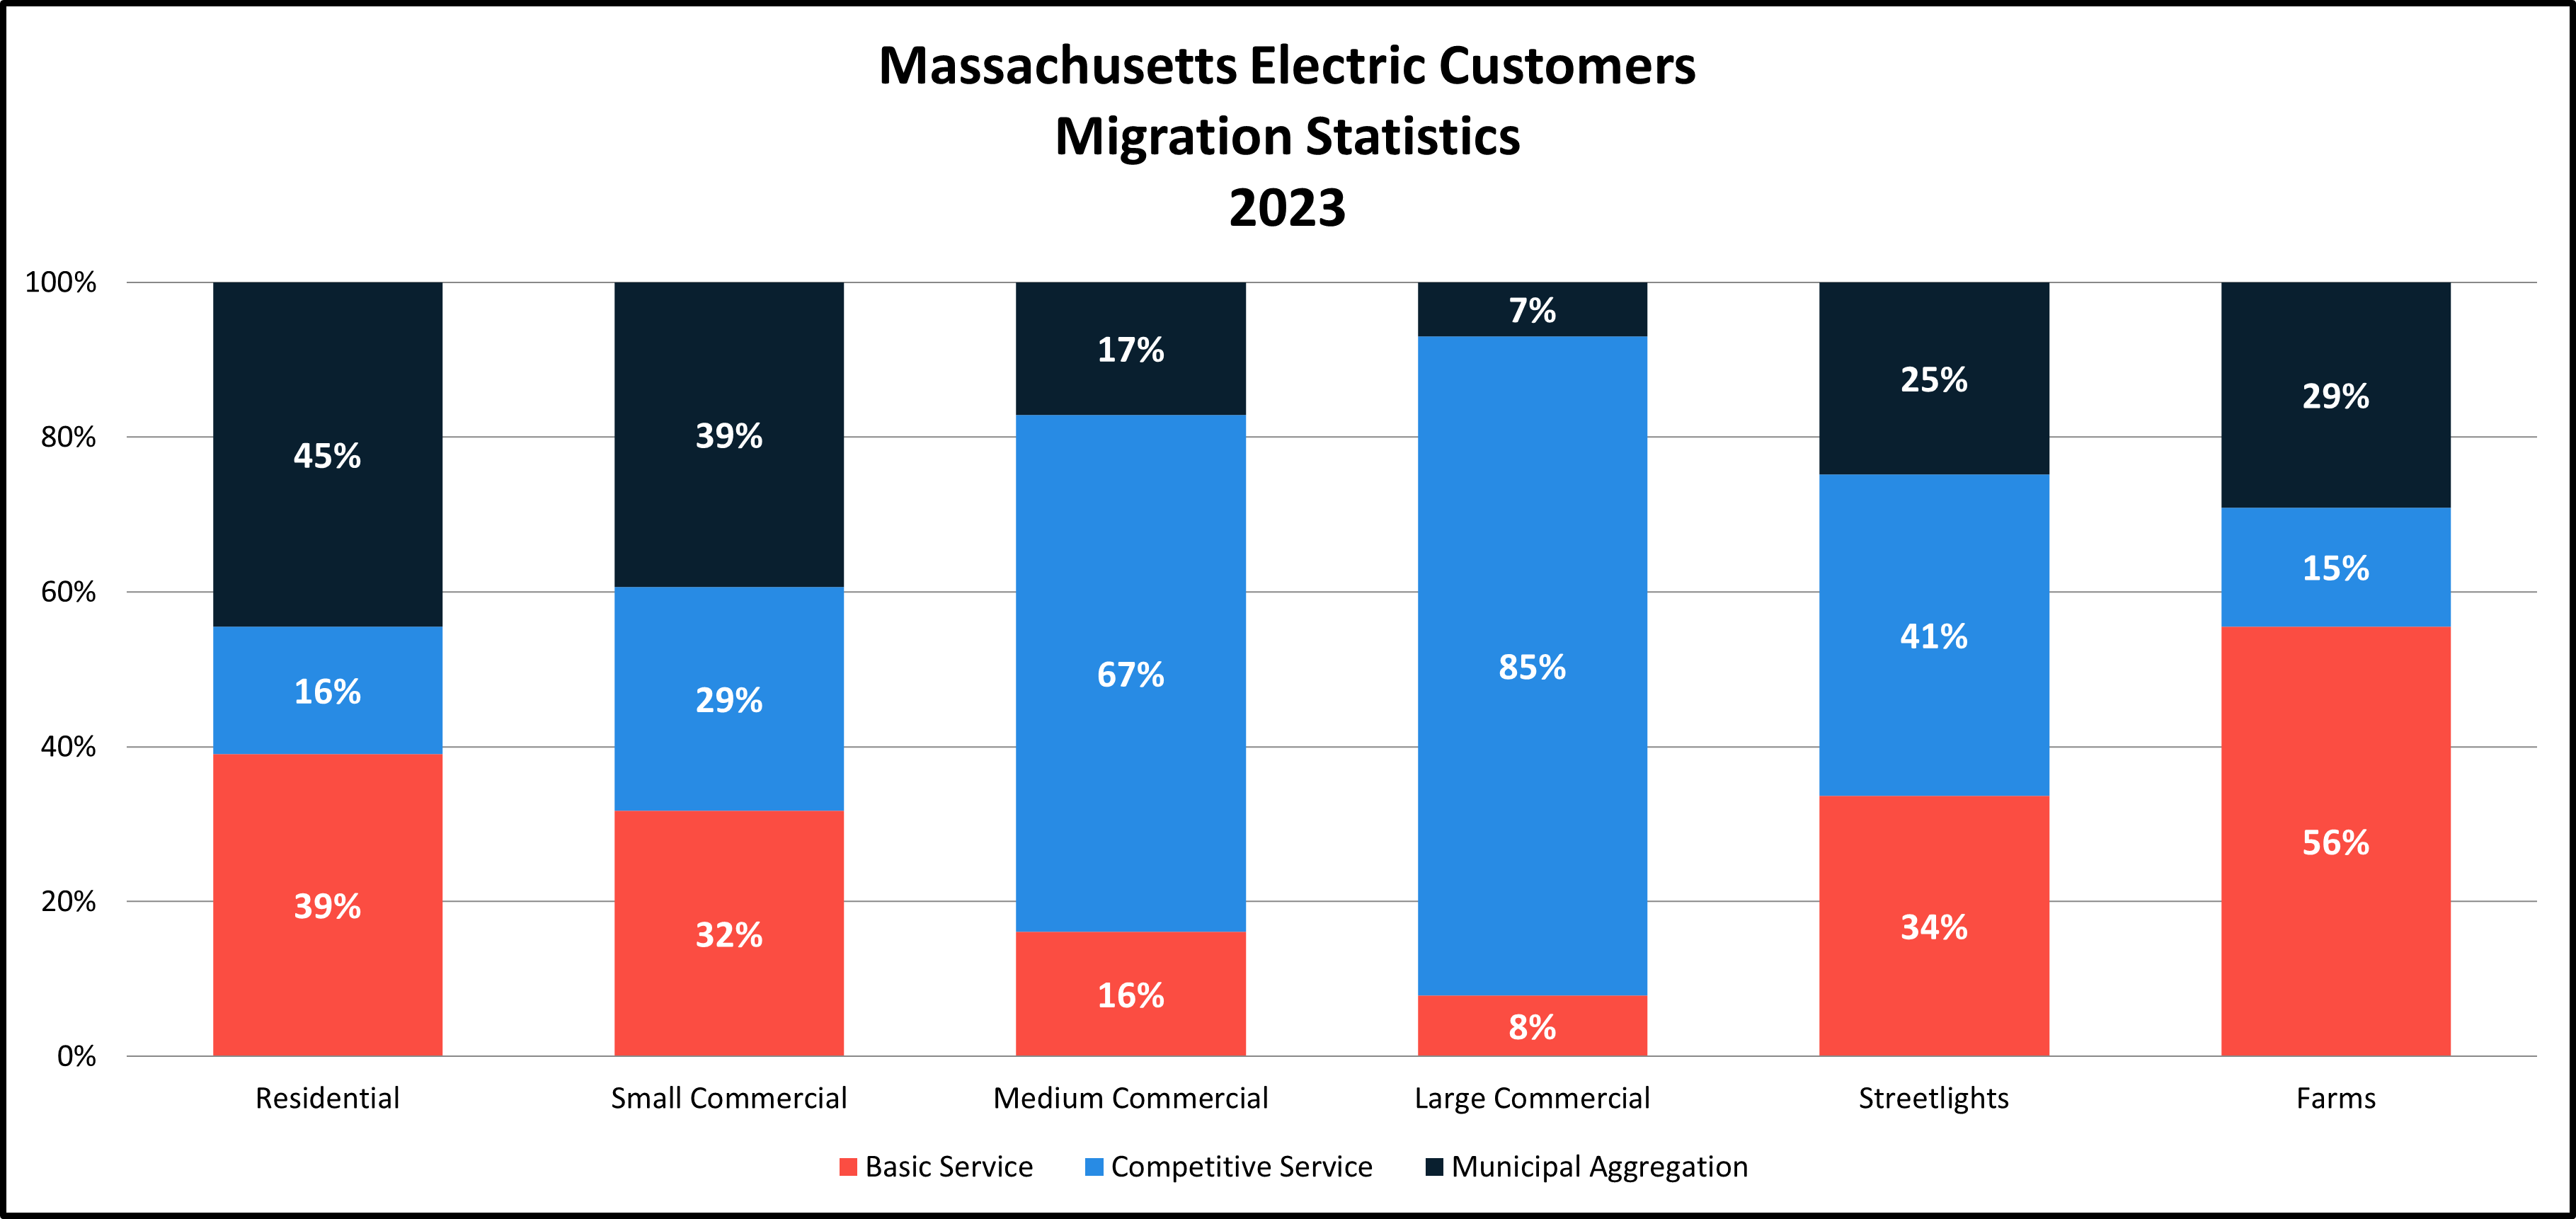 Bar chart of Massachusetts Electric Customers Basic vs. Competitive Service in 2021 showing residents have the fewest options when buying electricity.